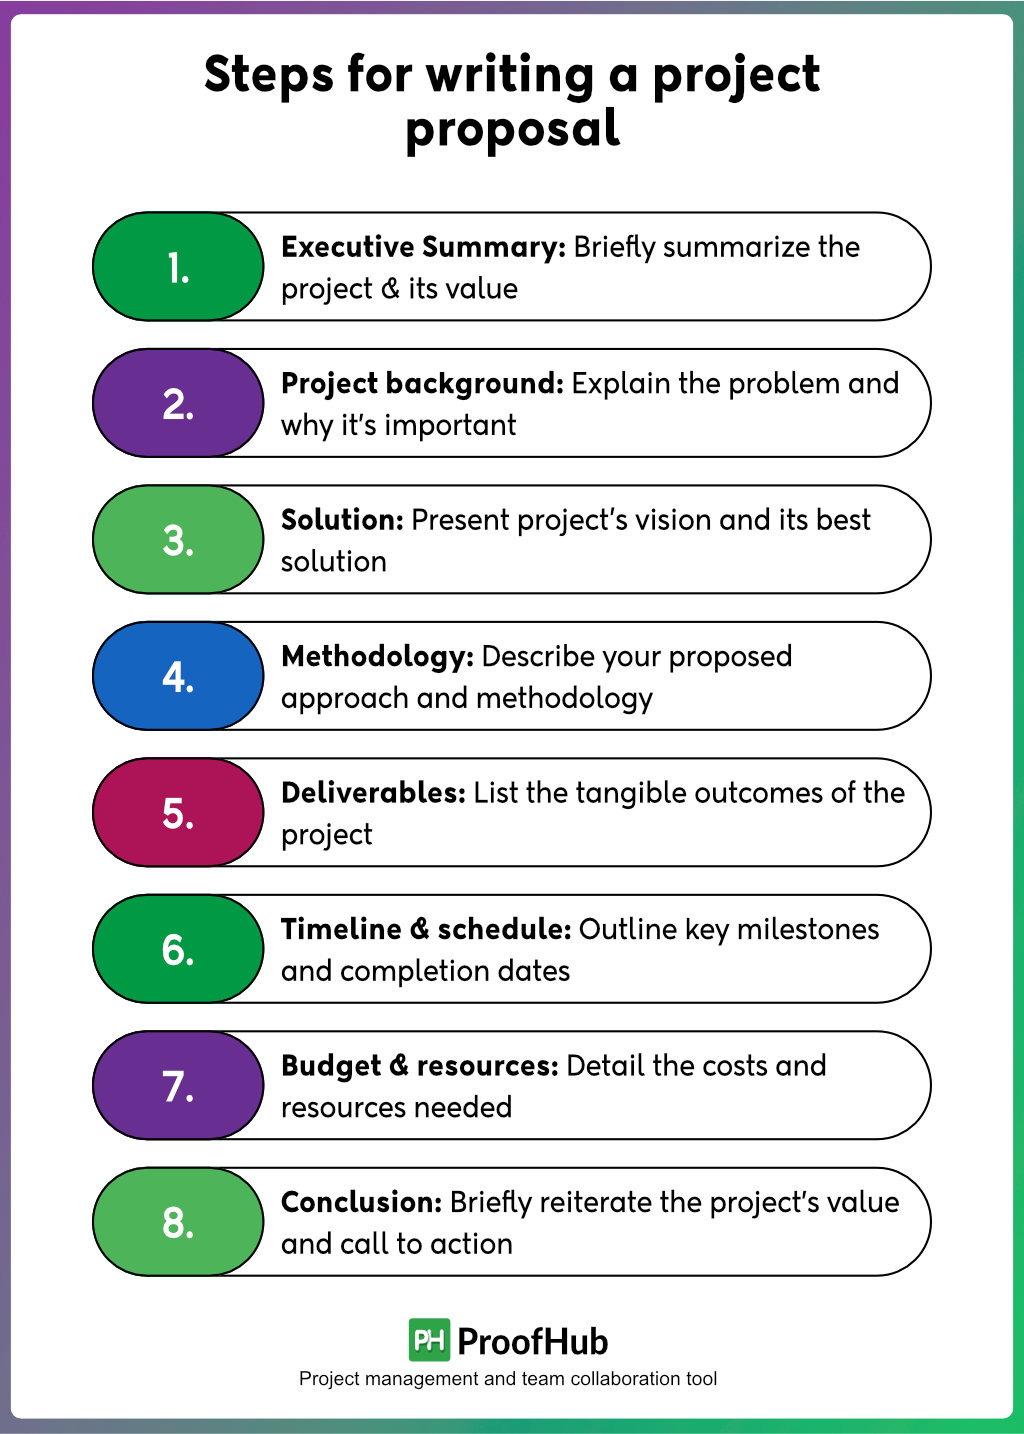 How to write a winning project proposal